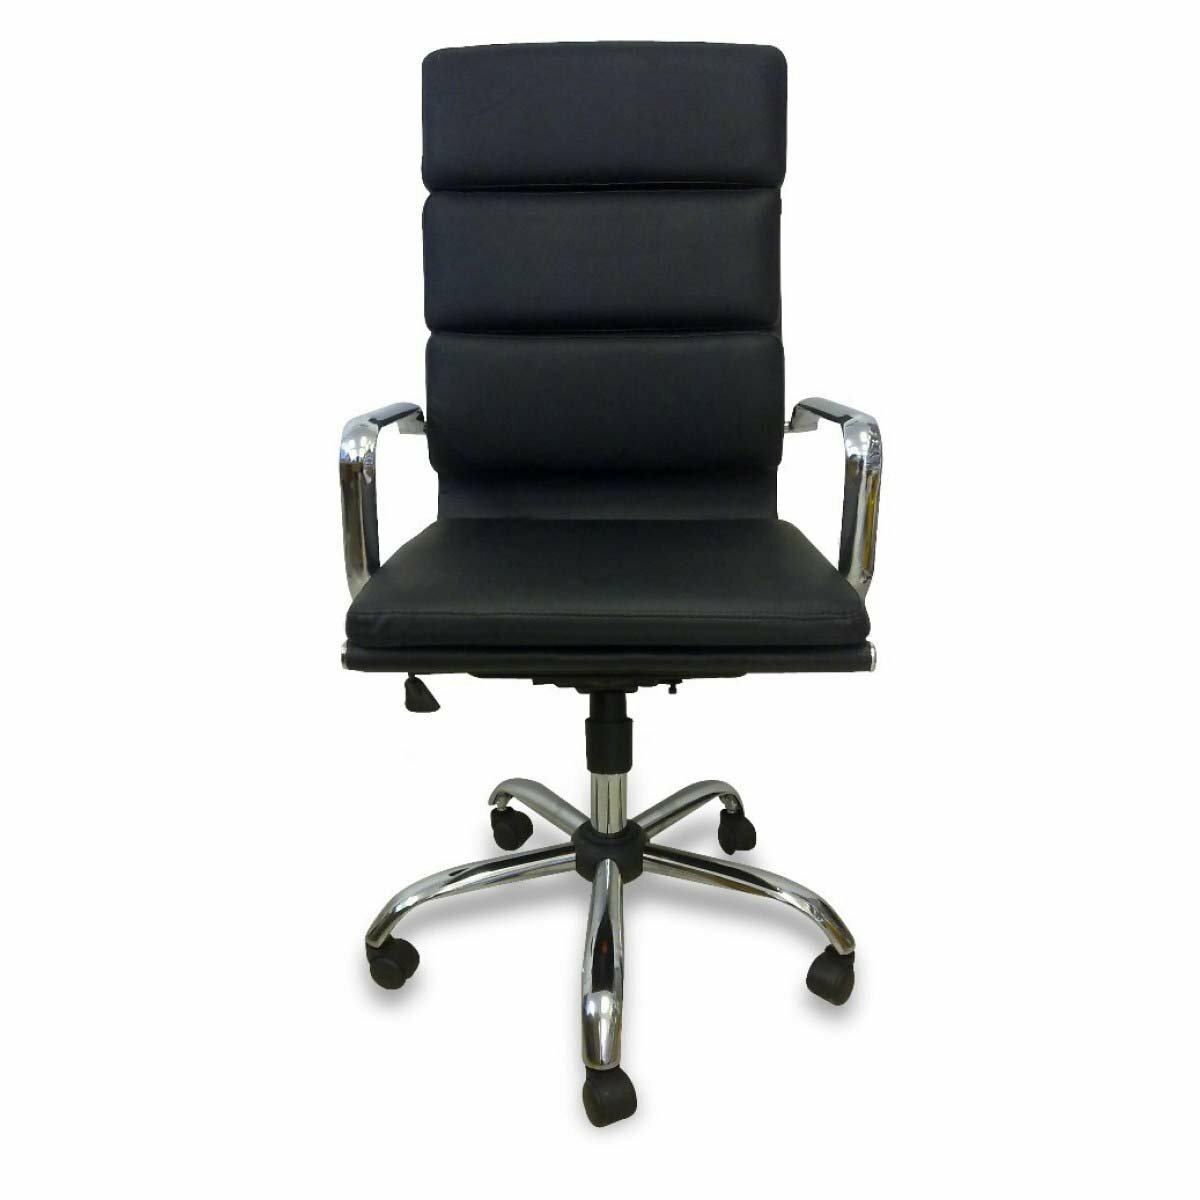 Aria Soft Pad Boardroom Office Chair - Black